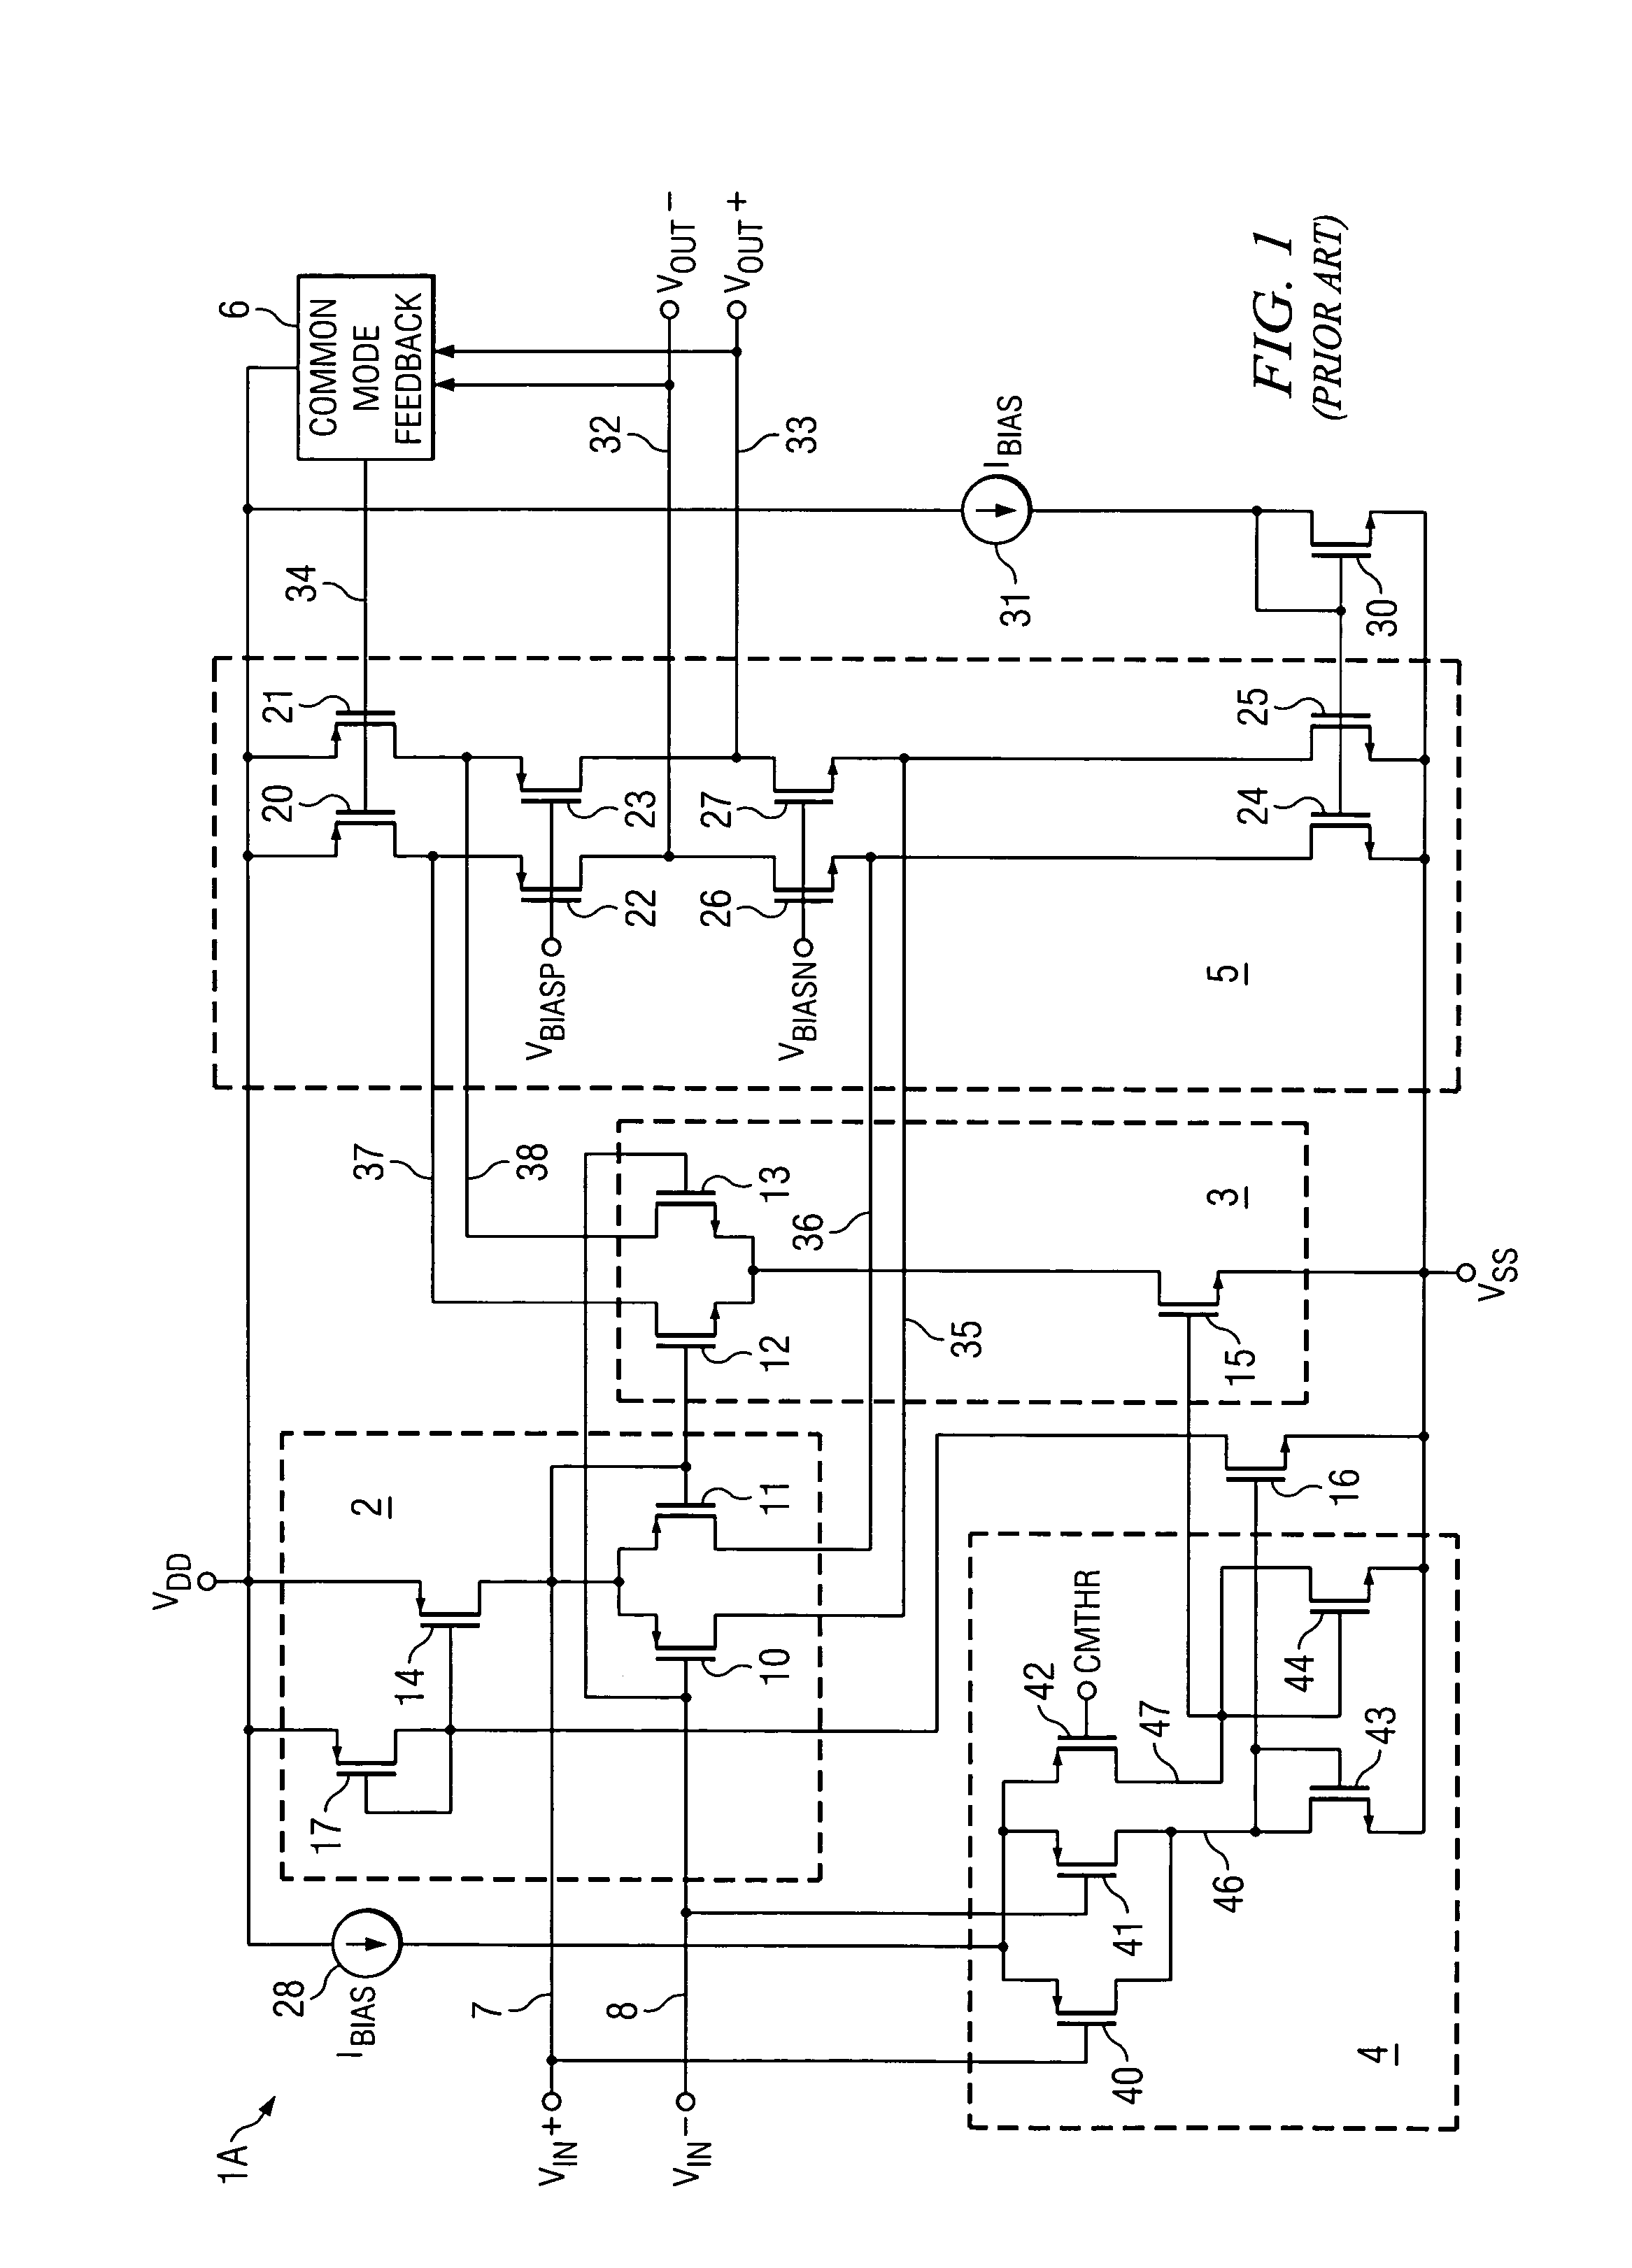 Circuit and method for switching active loads of operational amplifier input stage